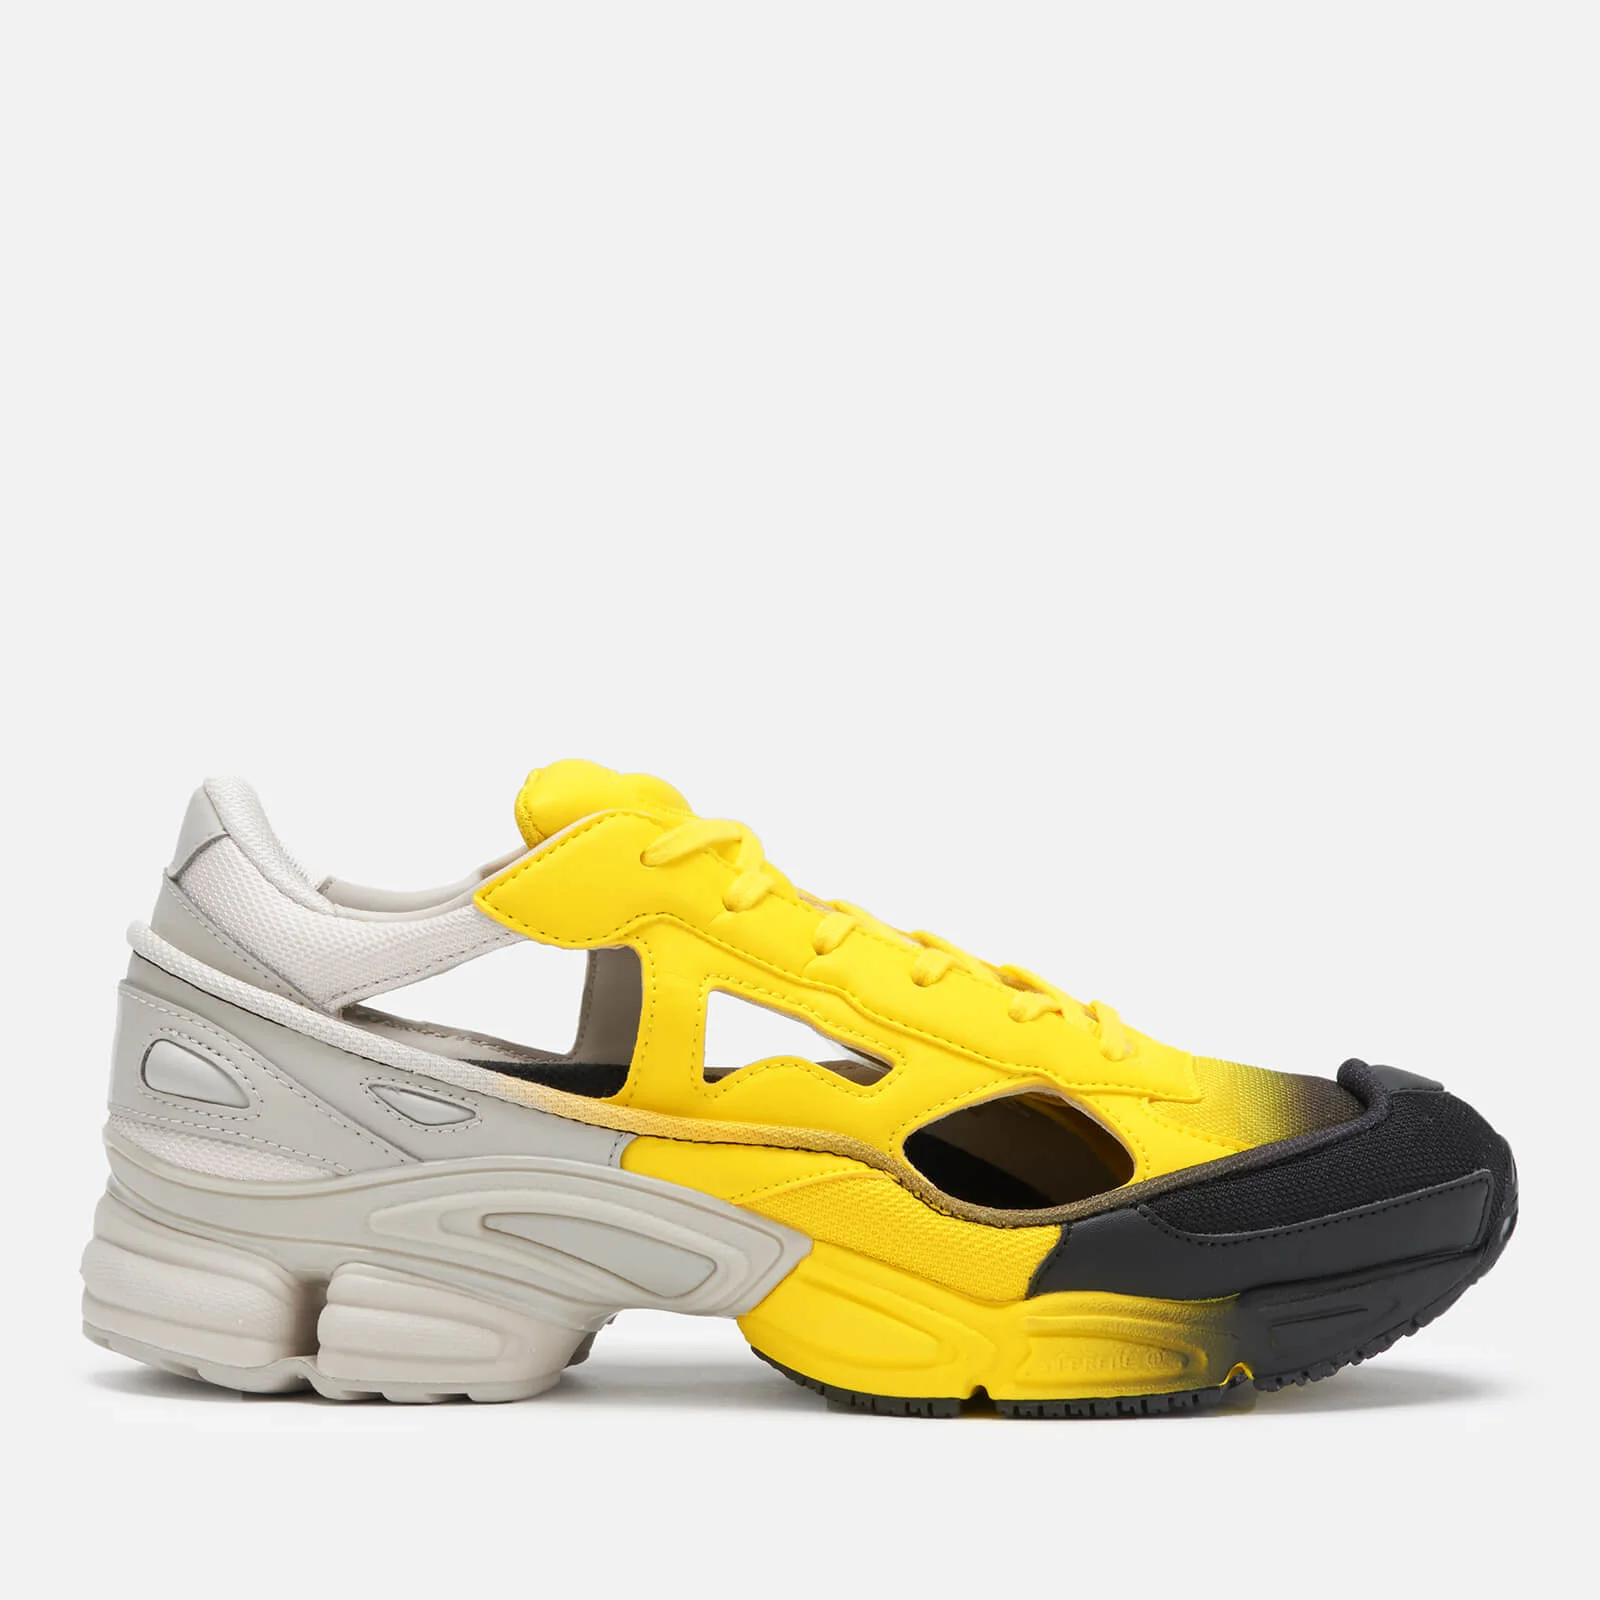 adidas by Raf Simons Men's Replicant Ozweego Pack Trainers - Yellow Image 1